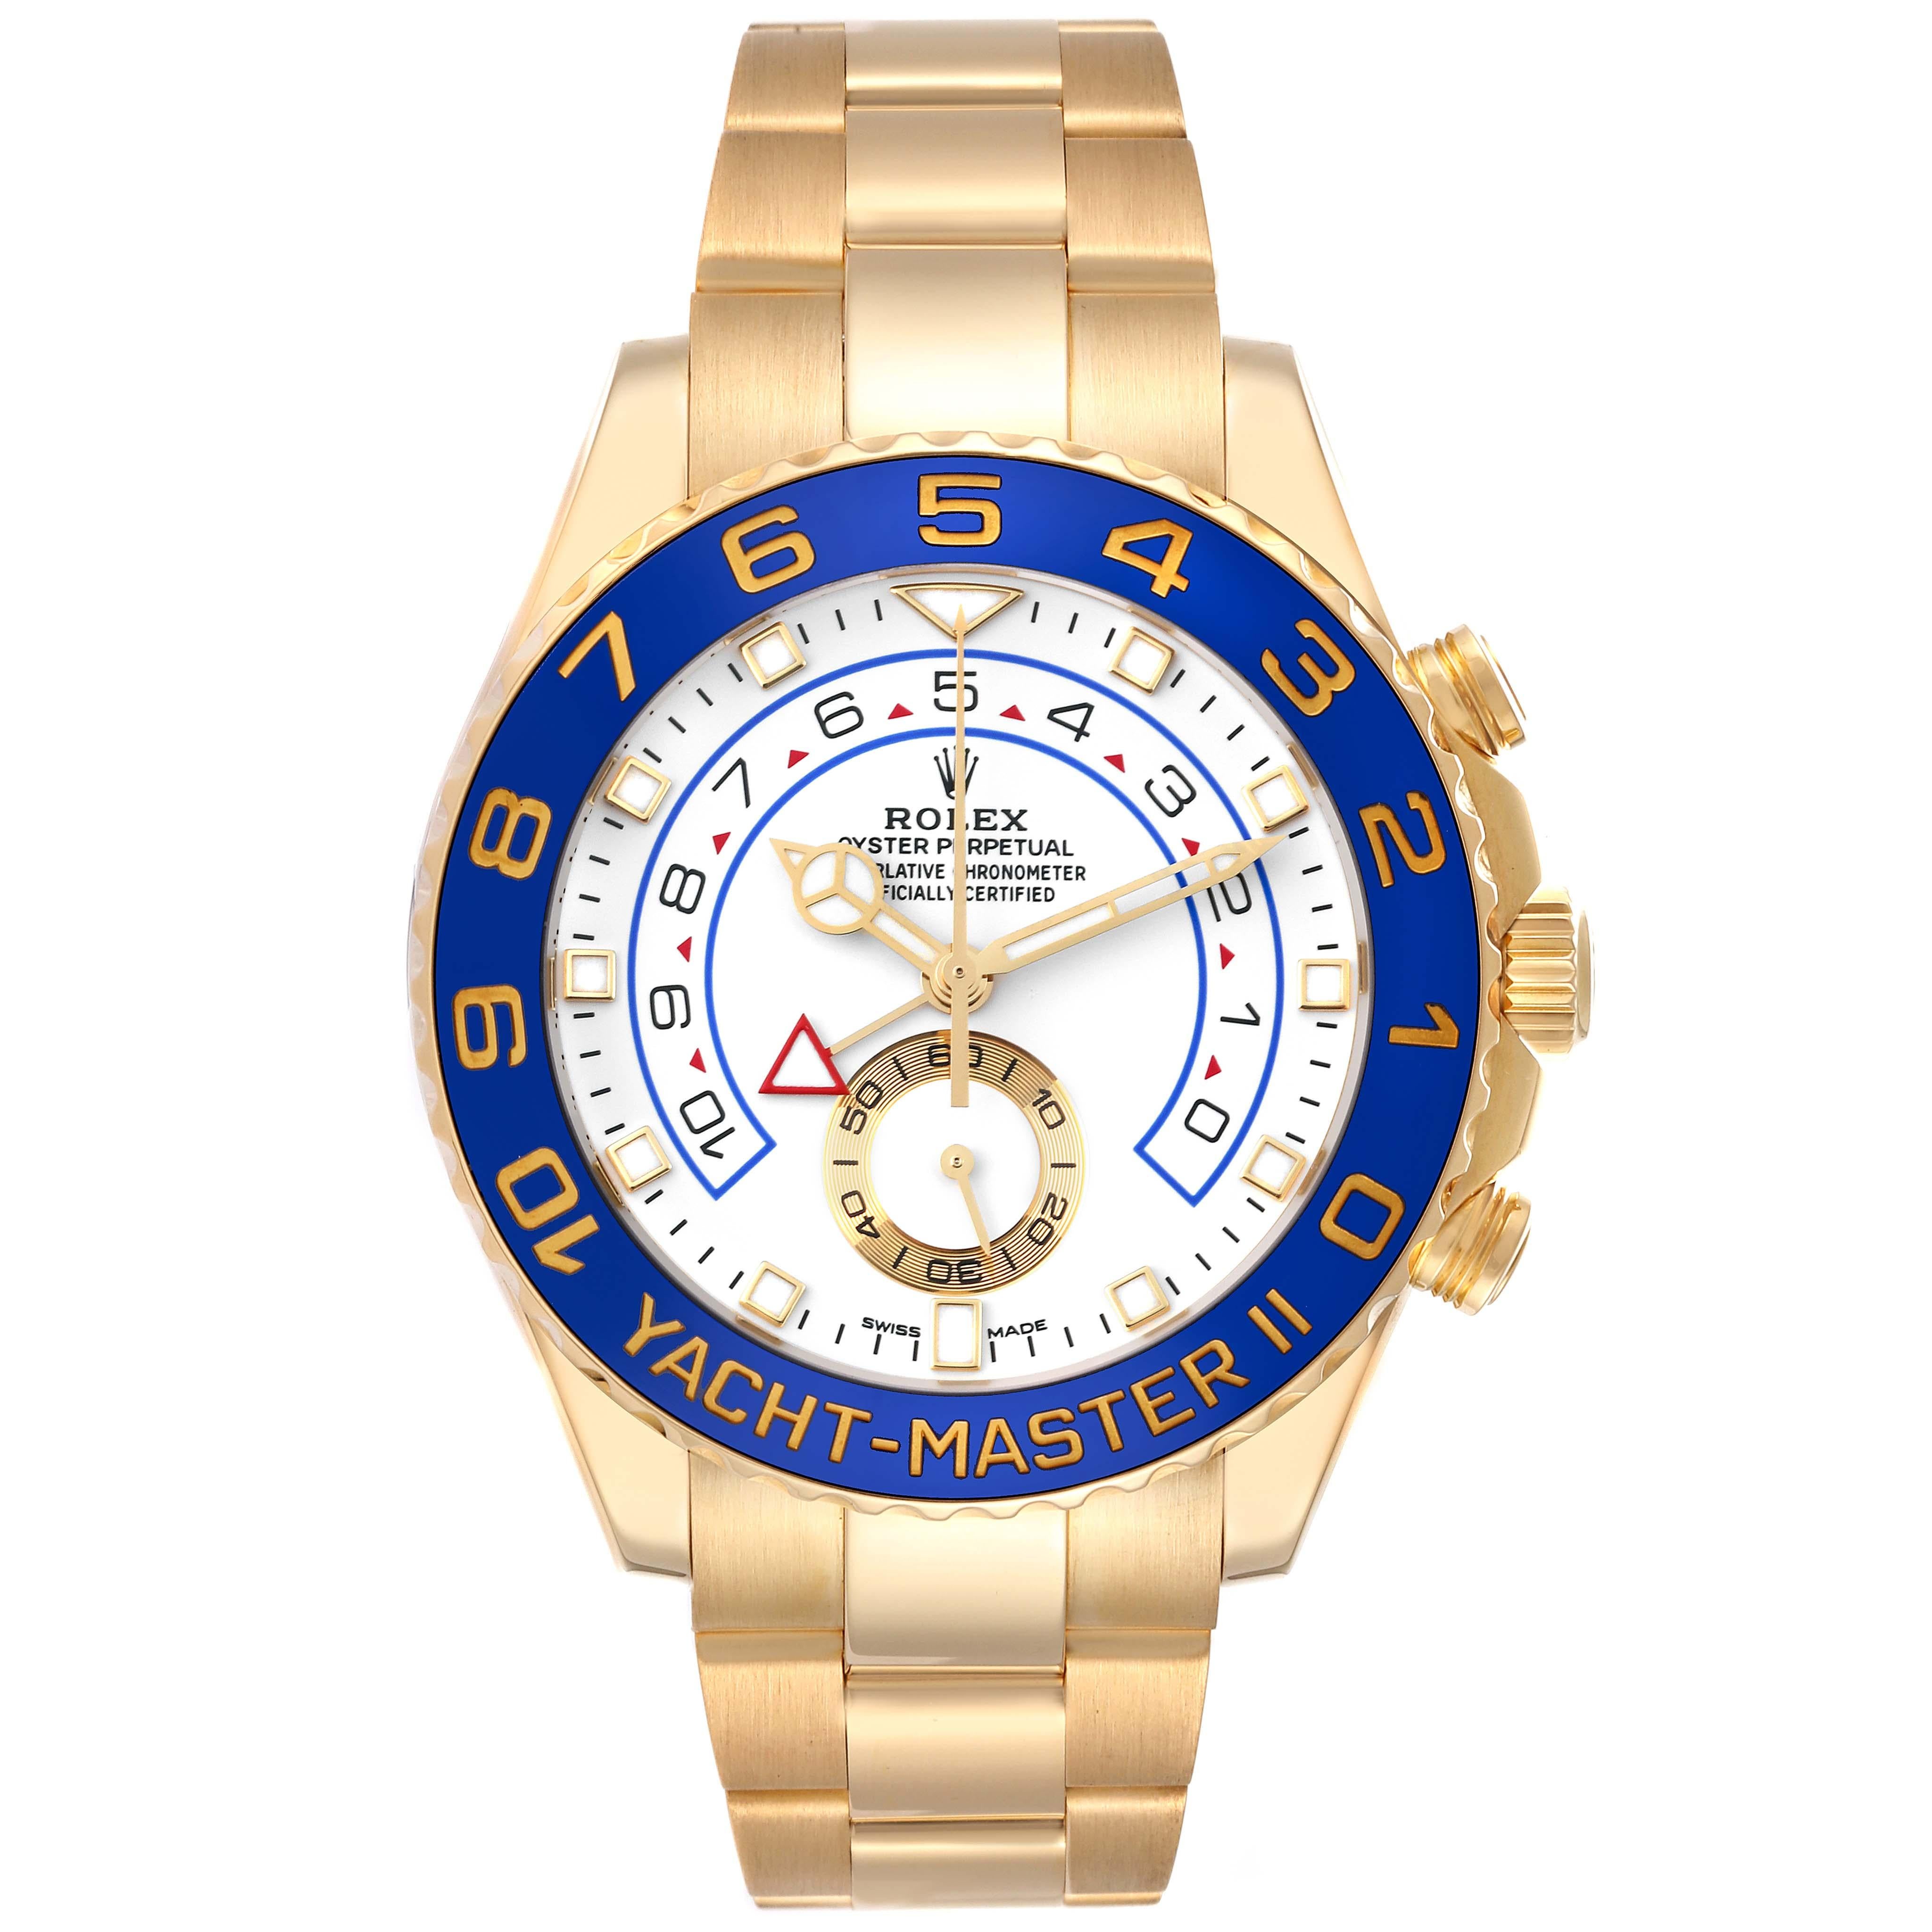 Rolex Yachtmaster II Regatta Chronograph Yellow Gold Men's Watch 116688 Box Card. Officially certified chronometer self-winding movement. 18K yellow gold case 44 mm in diameter. Screw down crown and caseback. Rolex logo on a crown. Ring Command 90